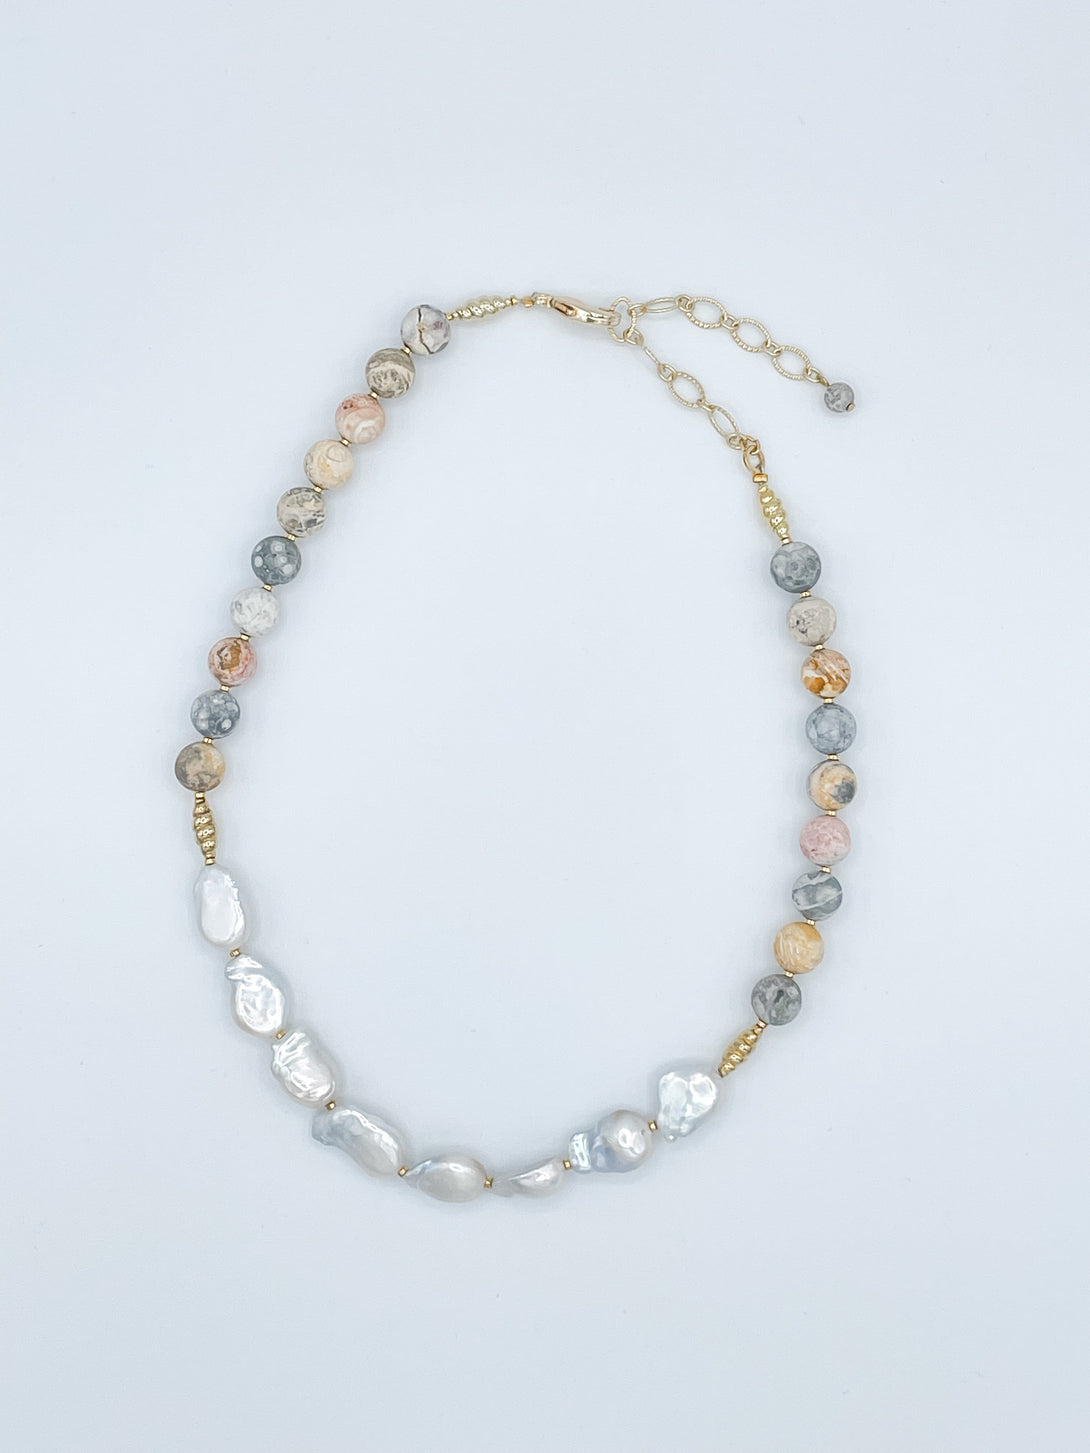 Pearl and Natural Jasper Stones Necklace